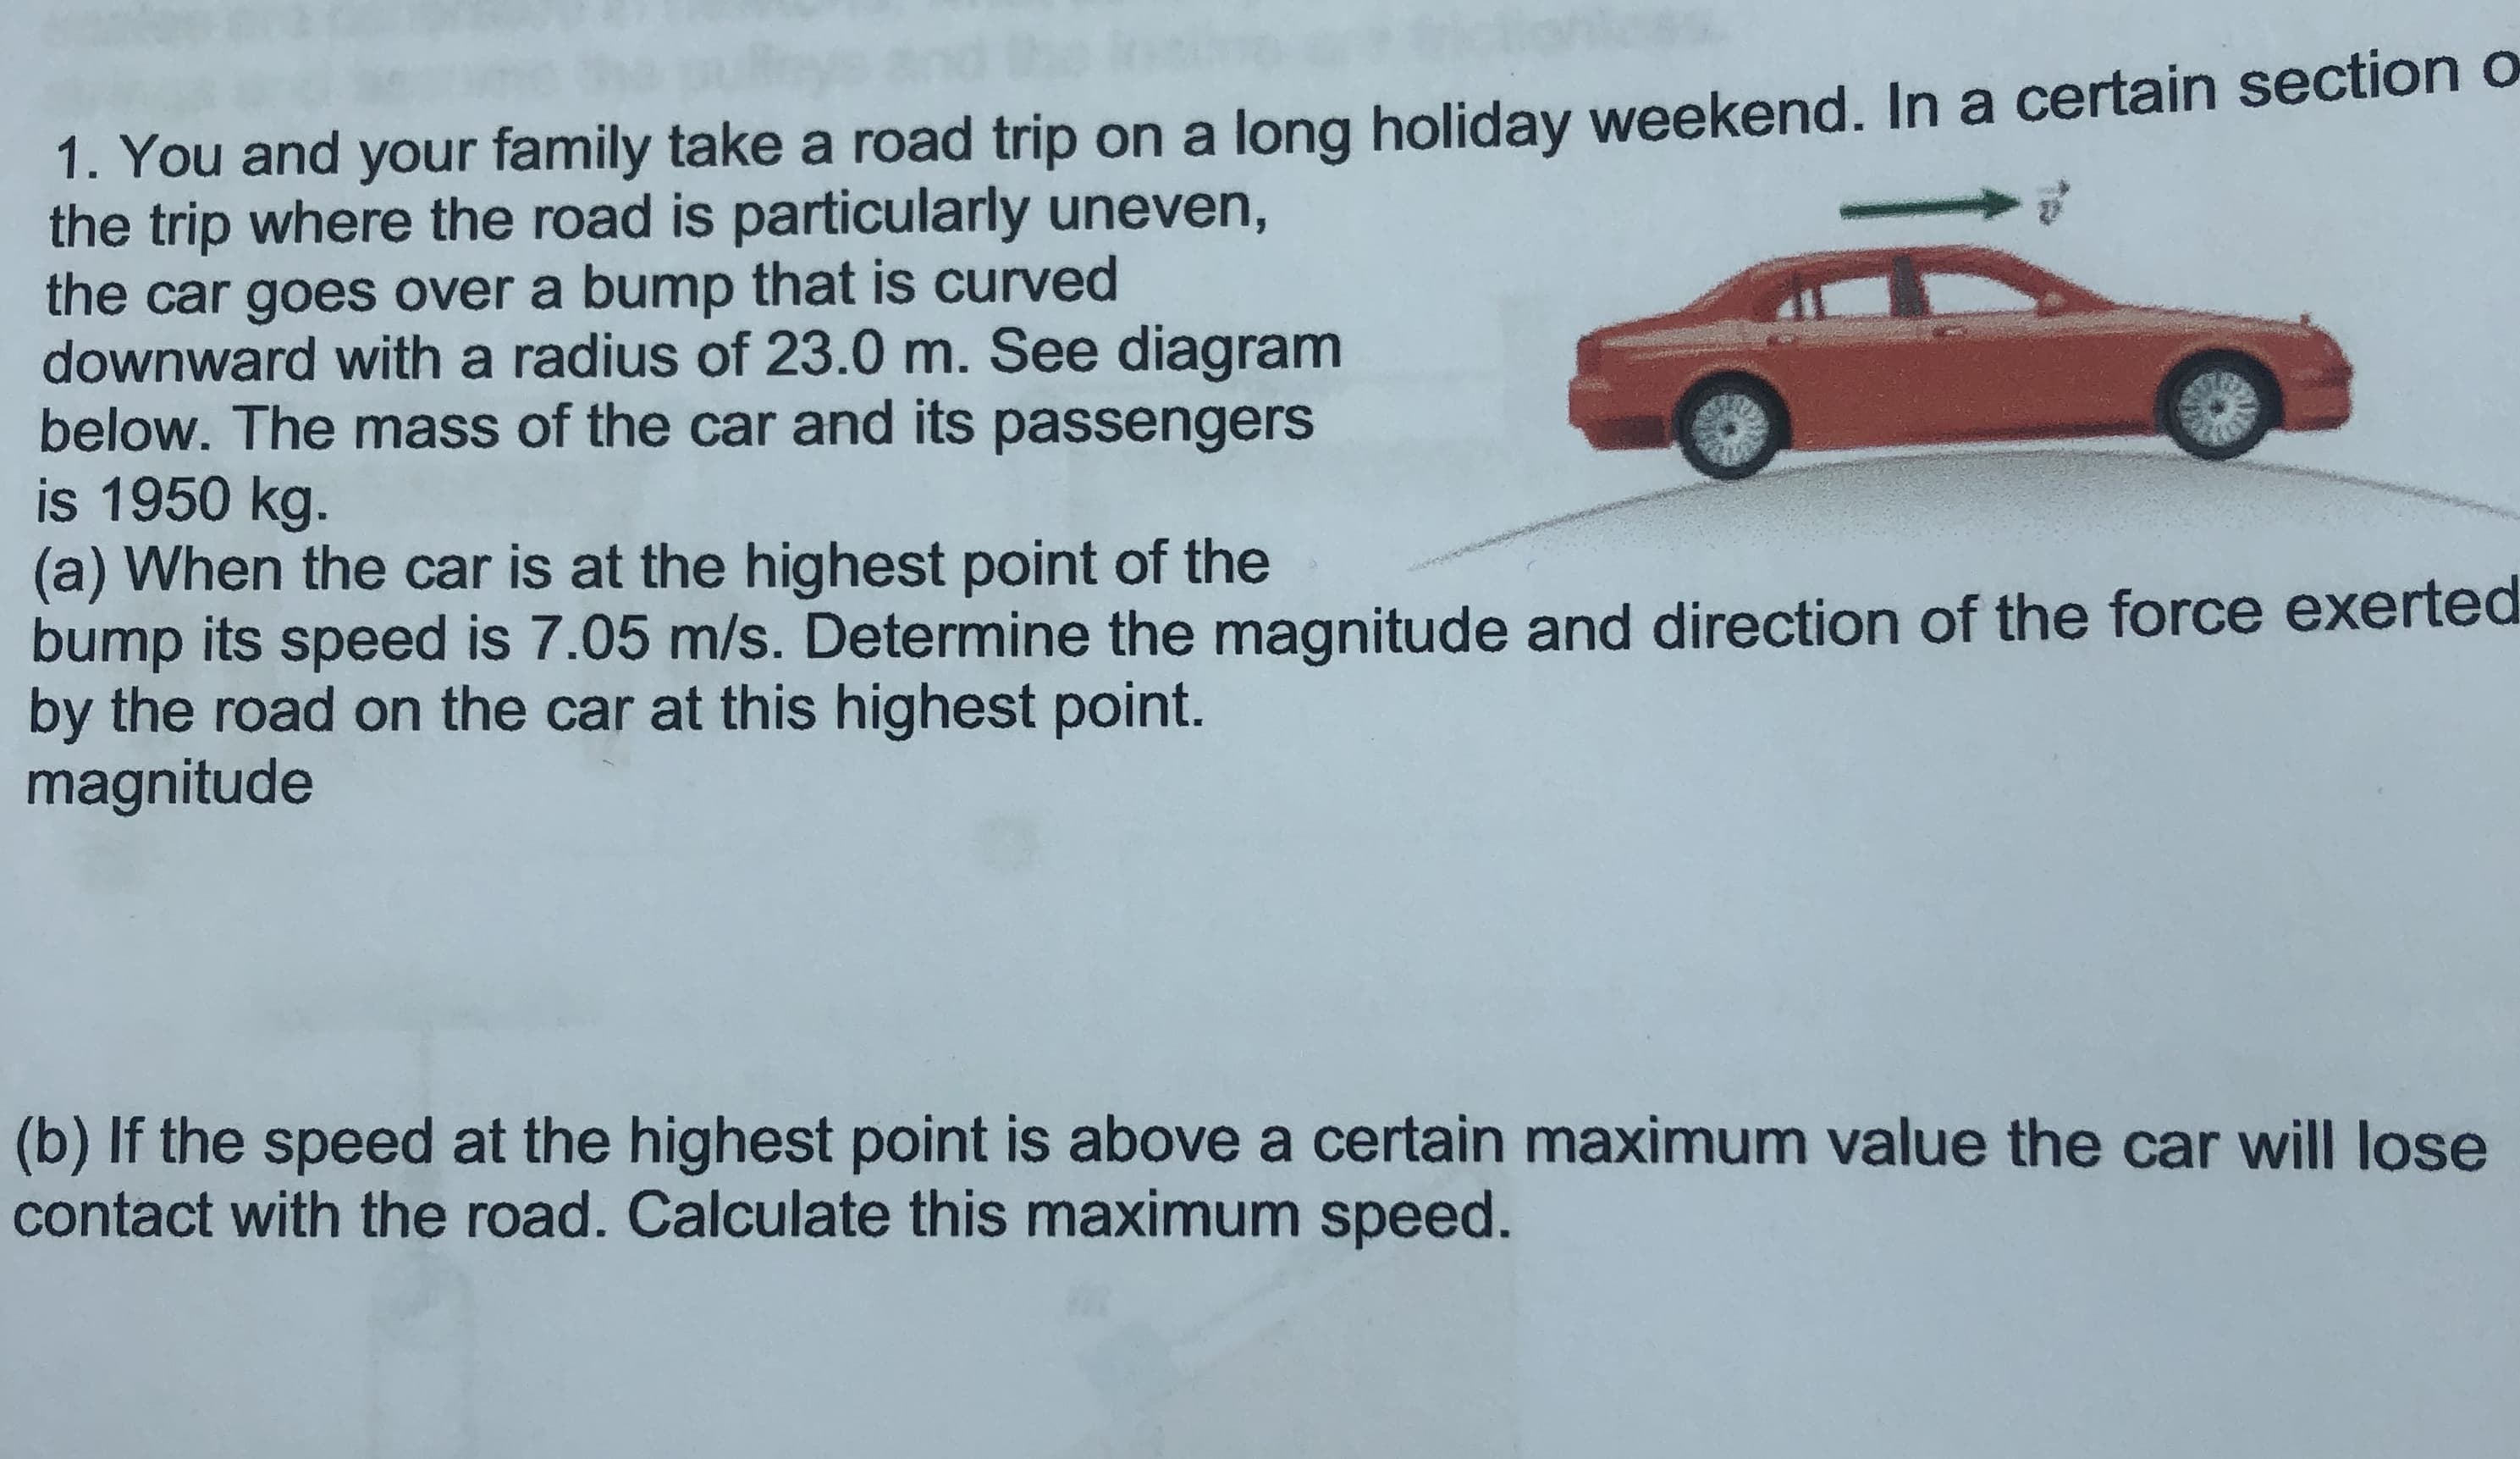 1. You and your family take a road trip on a long holiday weekend. In a certain section o
the trip where the road is particularly uneven,
the car goes over a bump that is curved
downward with a radius of 23.0 m. See diagram
below. The mass of the car and its passengers
is 1950 kg.
(a) When the car is at the highest point of the
bump its speed is 7.05 m/s. Determine the magnitude and direction of the force exerted
by the road on the car at this highest point.
magnitude
(b) If the speed at the highest point is above a certain maximum value the car will lose
contact with the road. Calculate this maximum speed.
